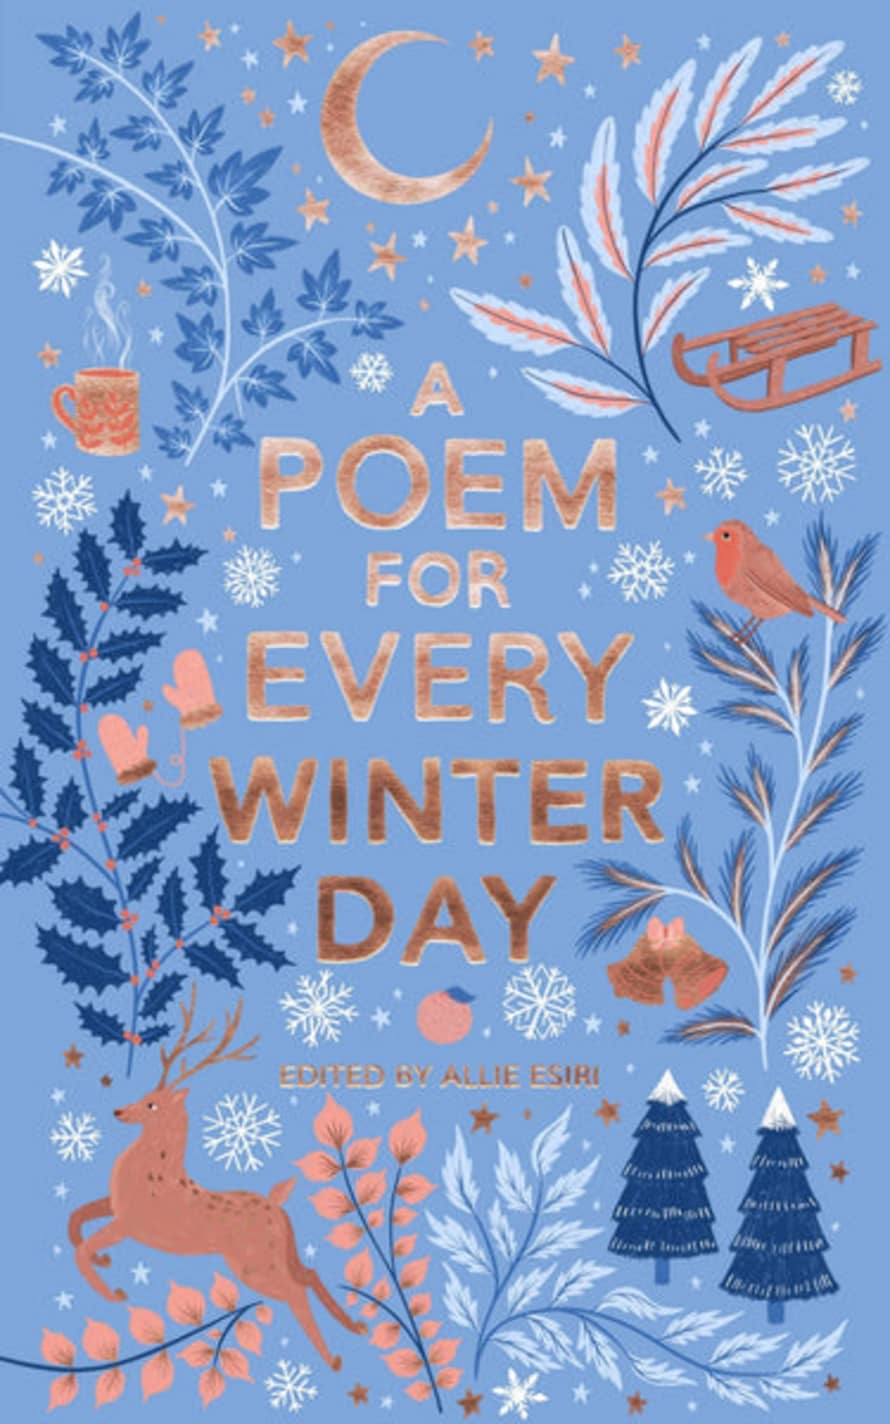 Book Poem For Every Winter Day